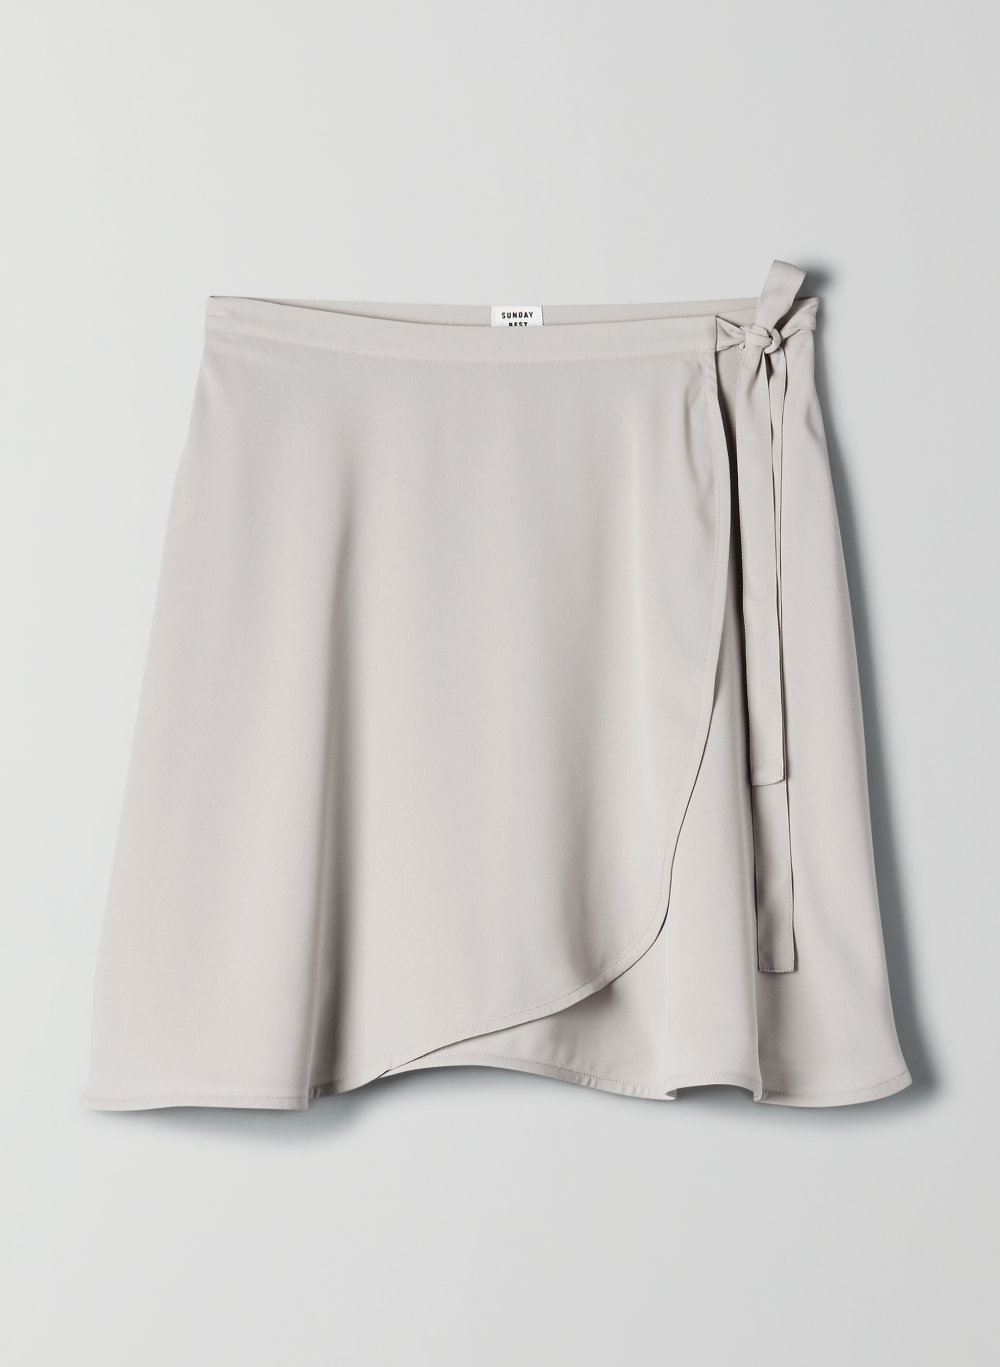 Short Flowy Skirts For Sale Flash Sales, 53% OFF 